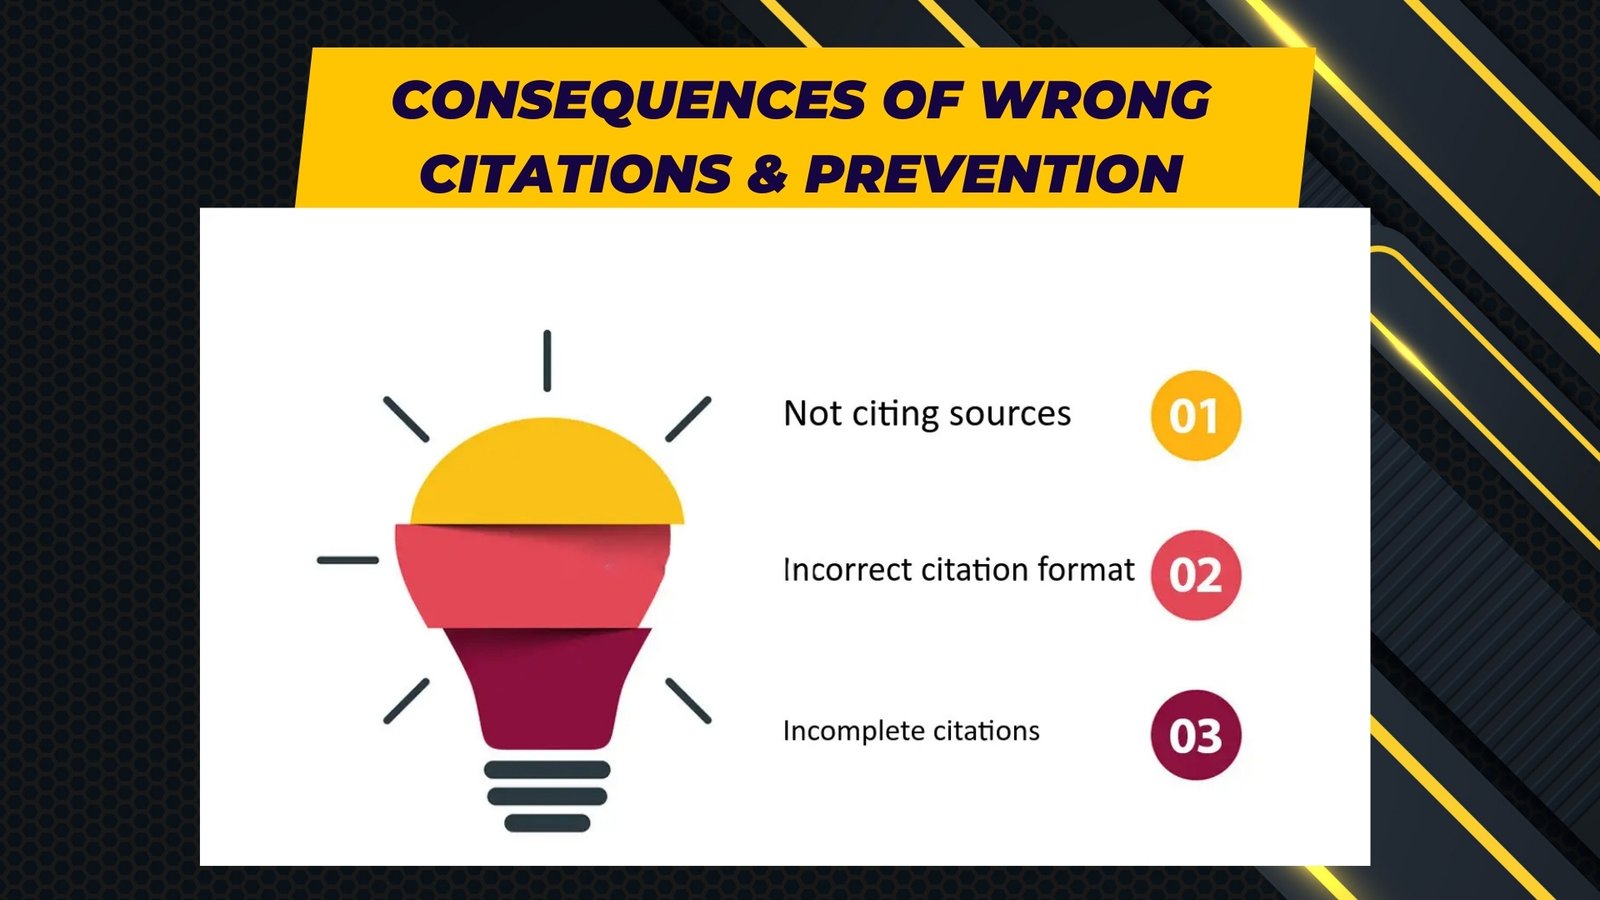 What is a citation? - Consequences of Wrong Citations & Prevention